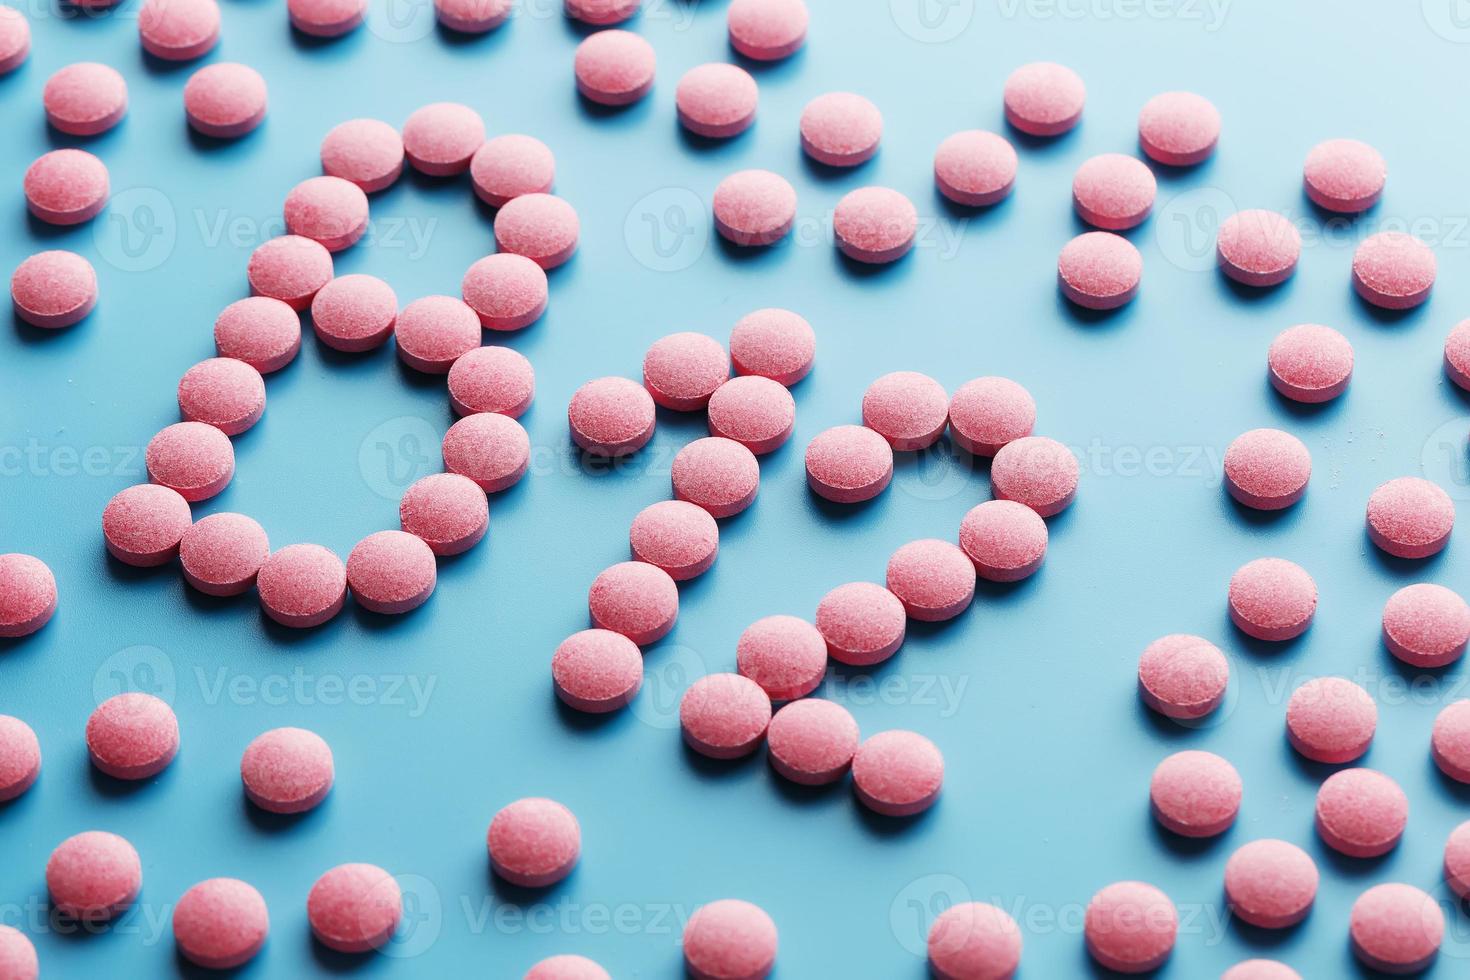 Pink pills in the shape of the letter B12 on a blue background, spilled out of a white can. photo